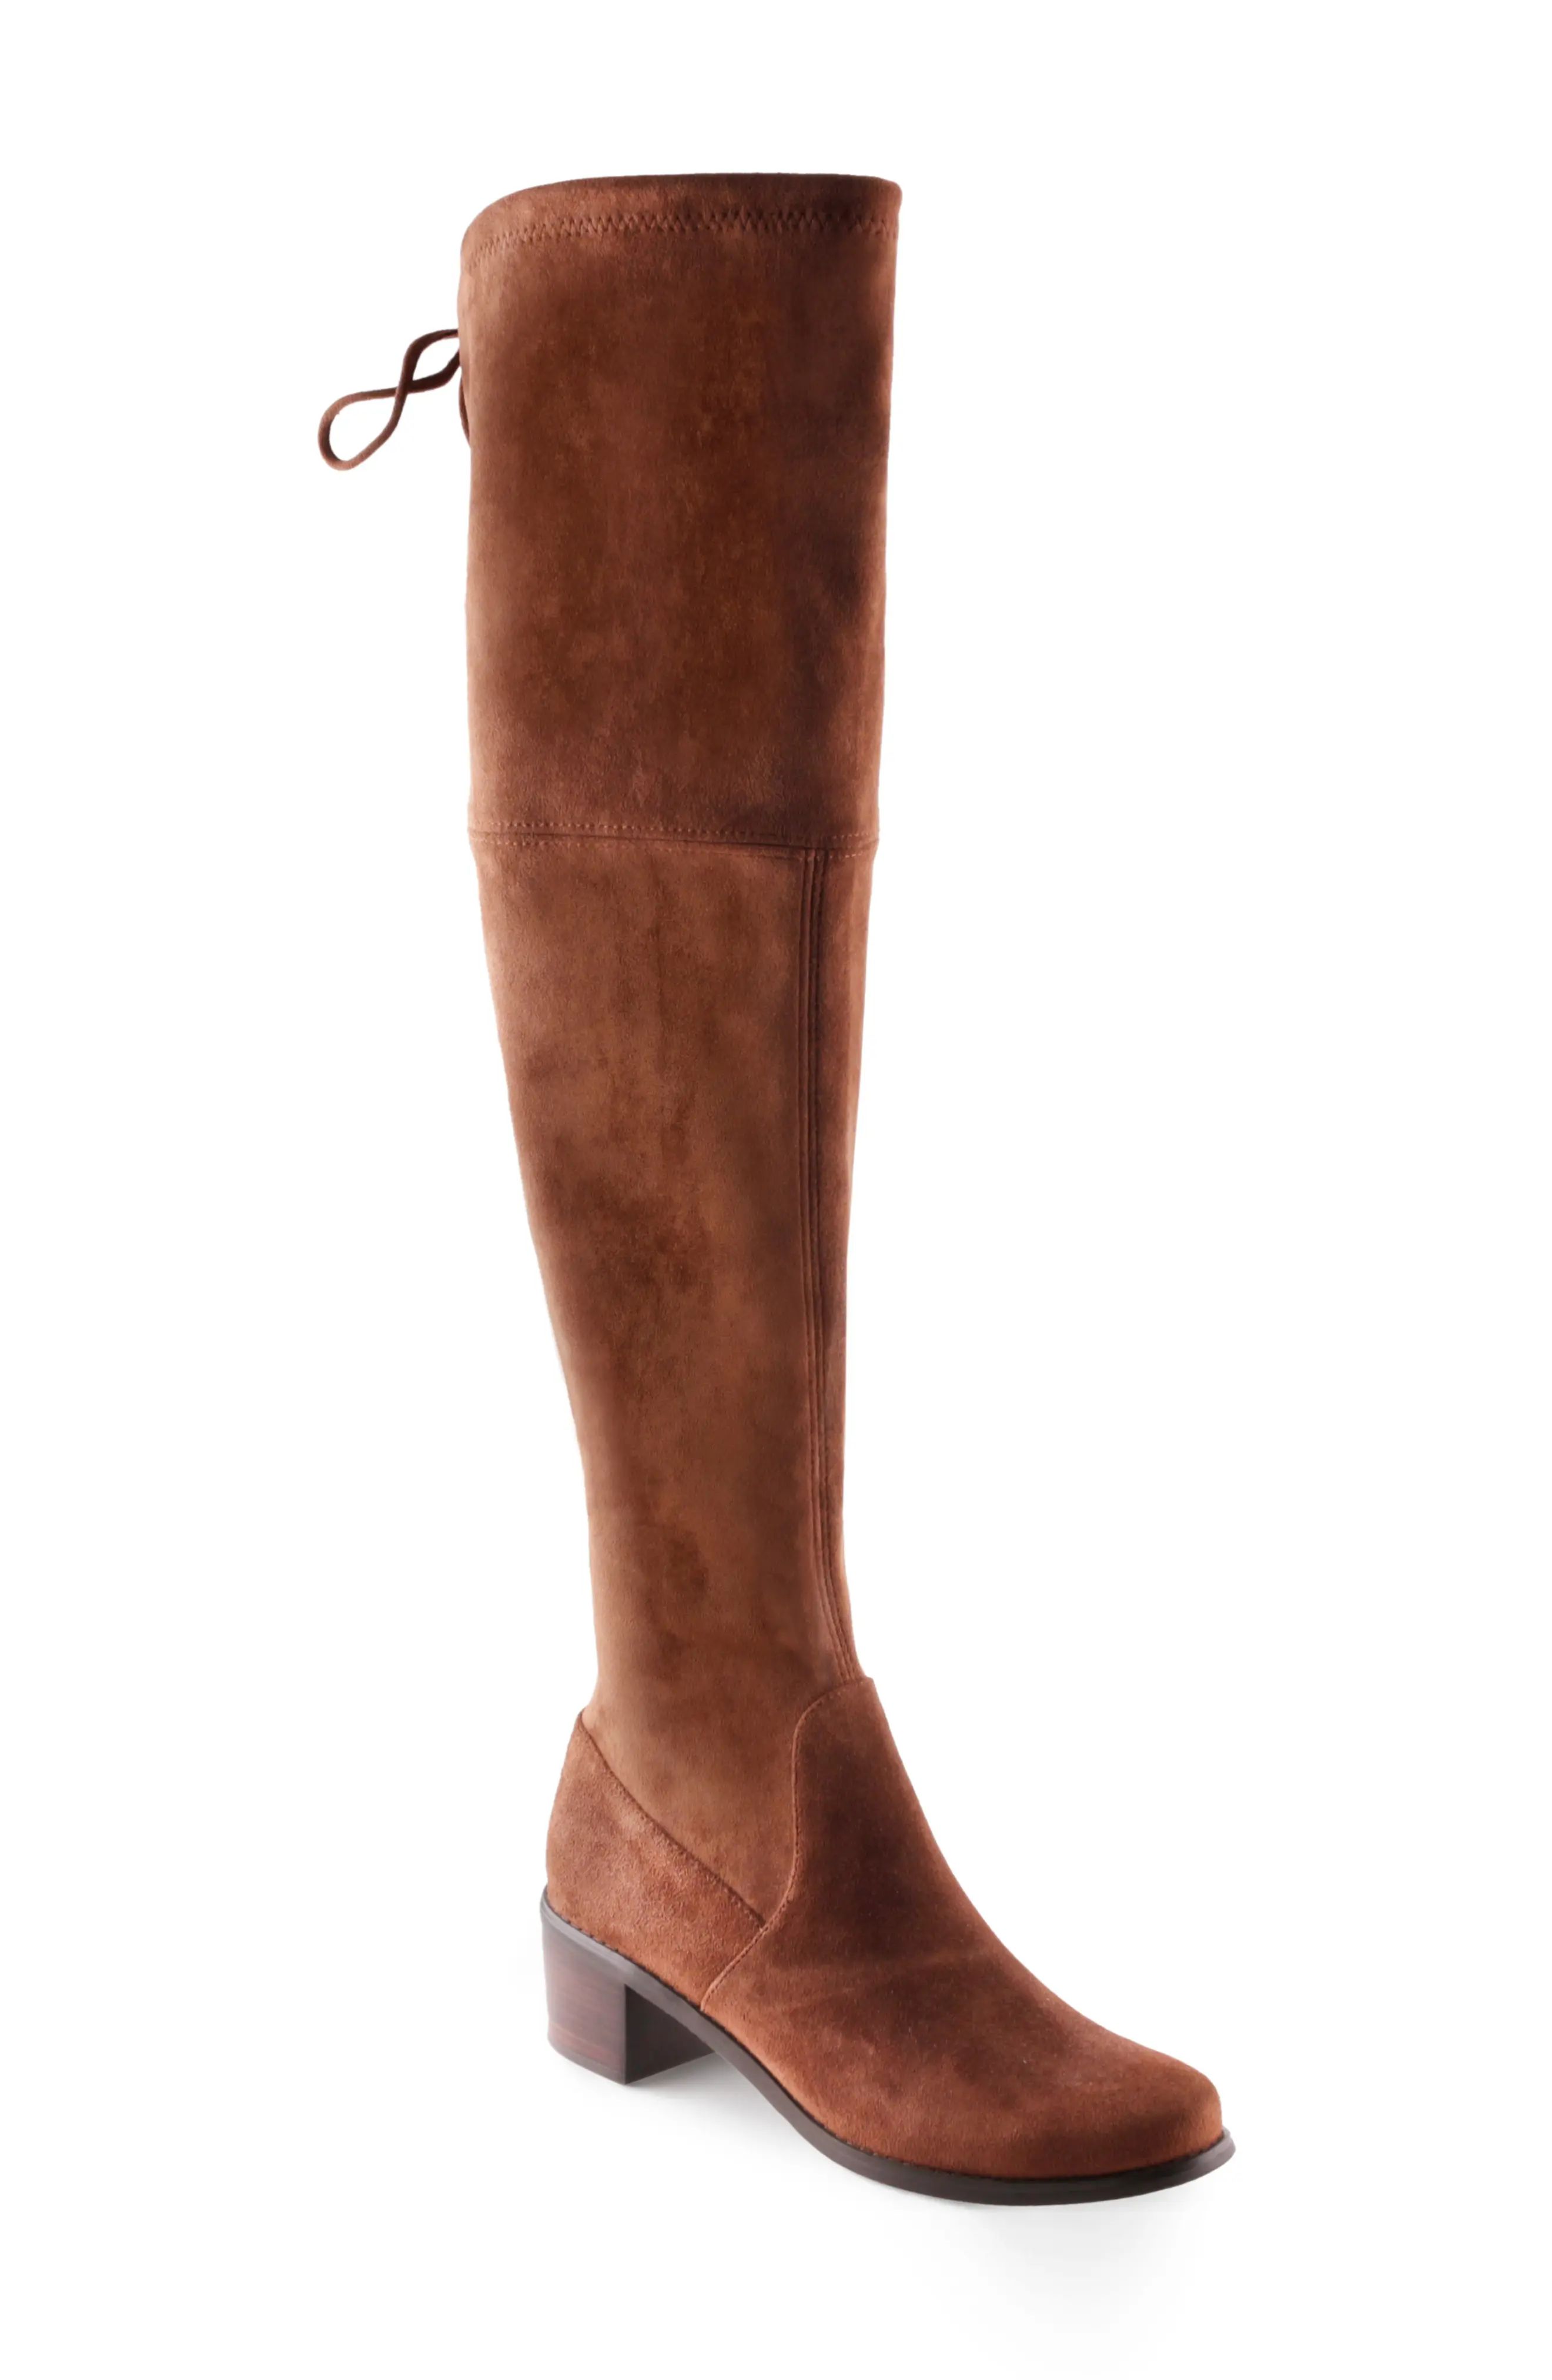 Women's Aquadiva Fresno Water Resistant Over The Knee Boot, Size 8.5 M - Brown | Nordstrom